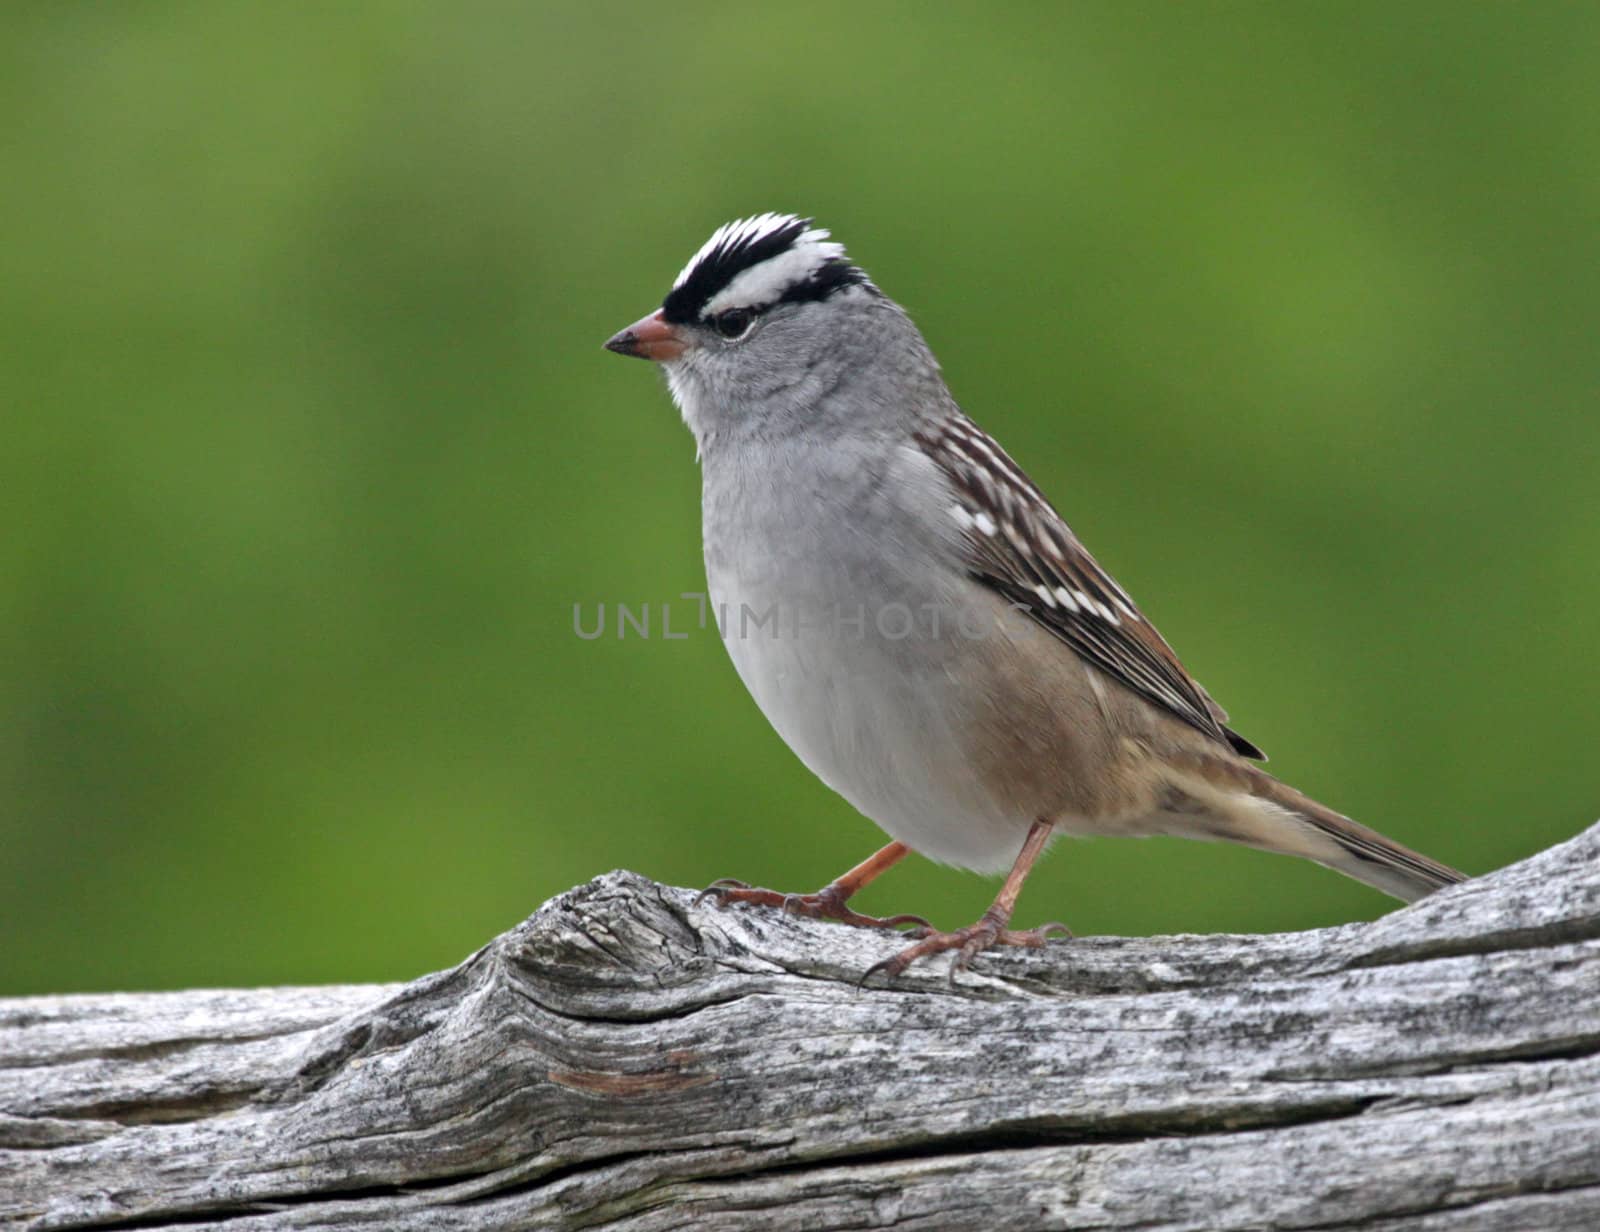 A perched White-crowned Sparrow (Zonotrichia leucophrys) sittings on a log.
